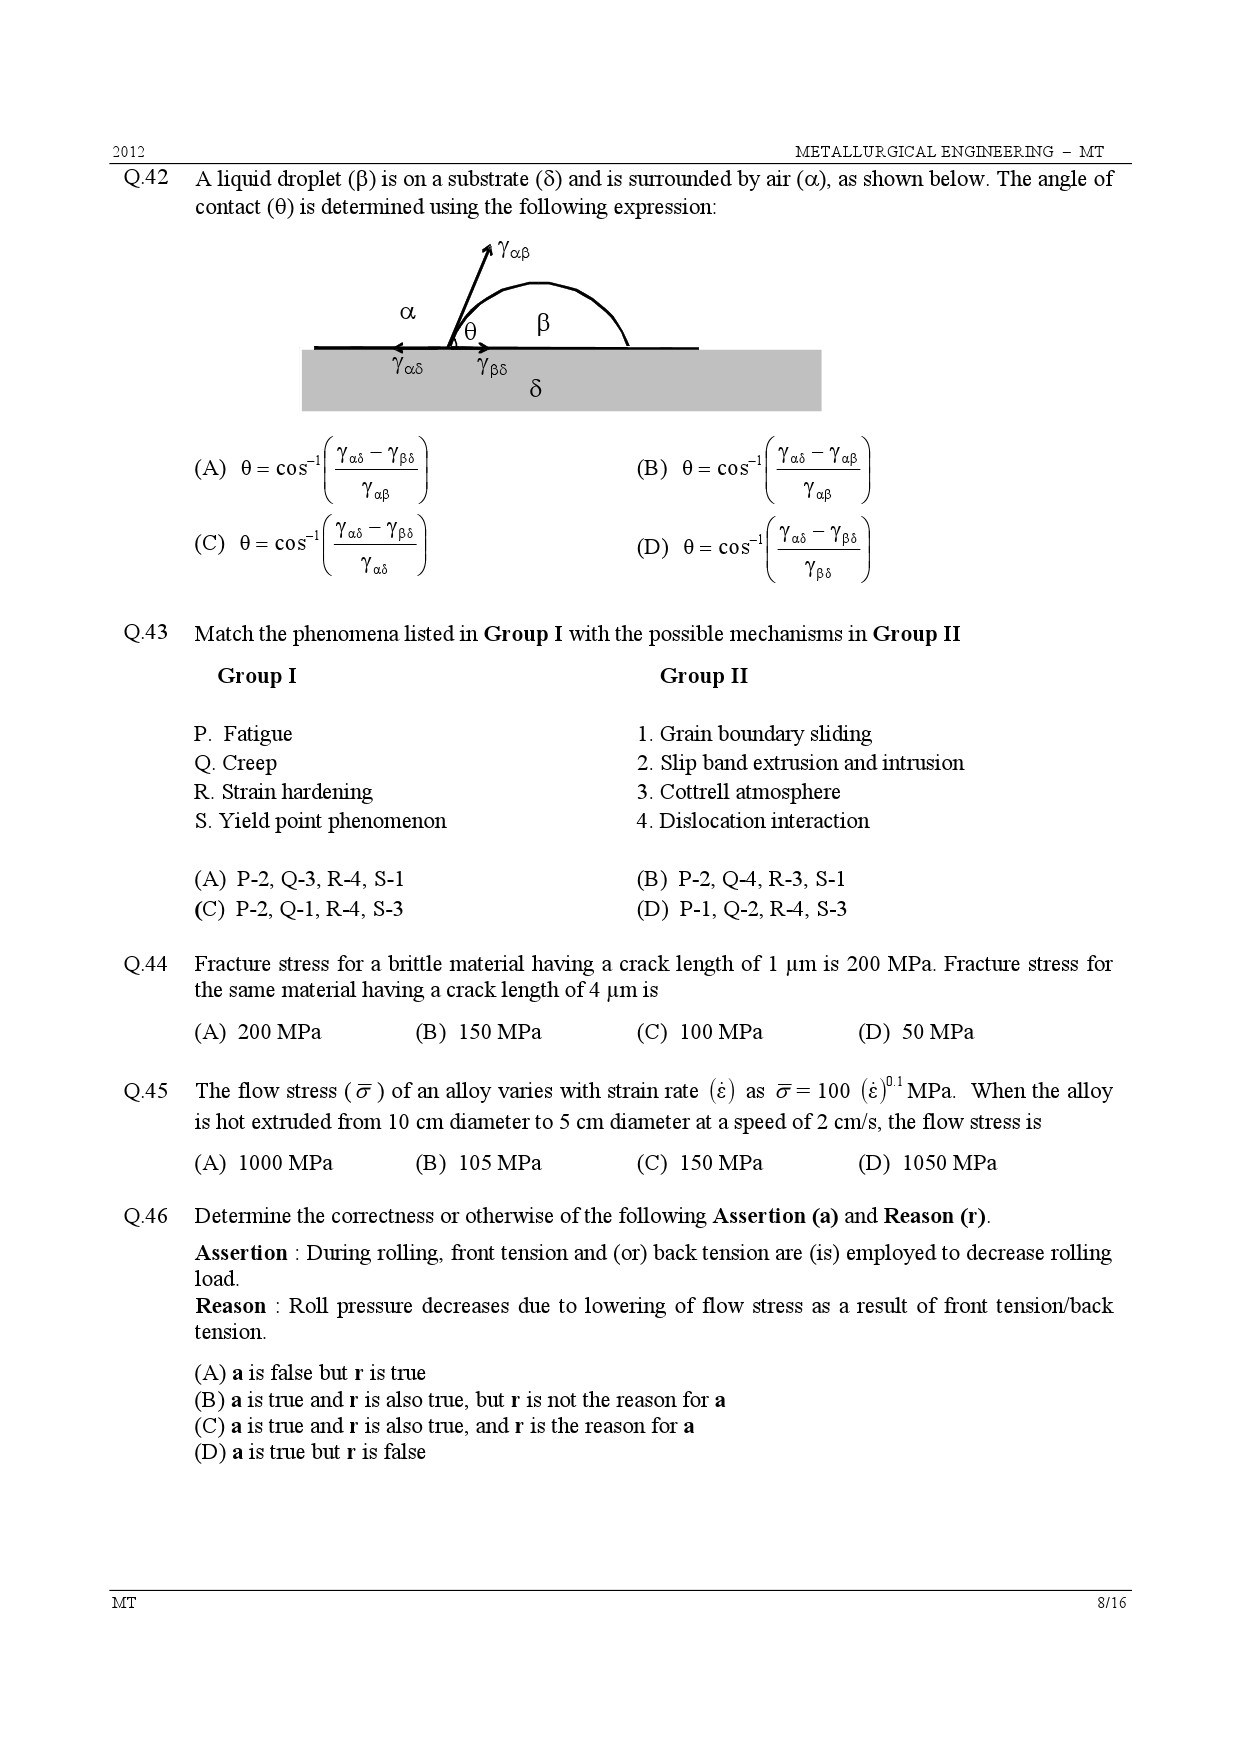 GATE Exam Question Paper 2012 Metallurgical Engineering 8